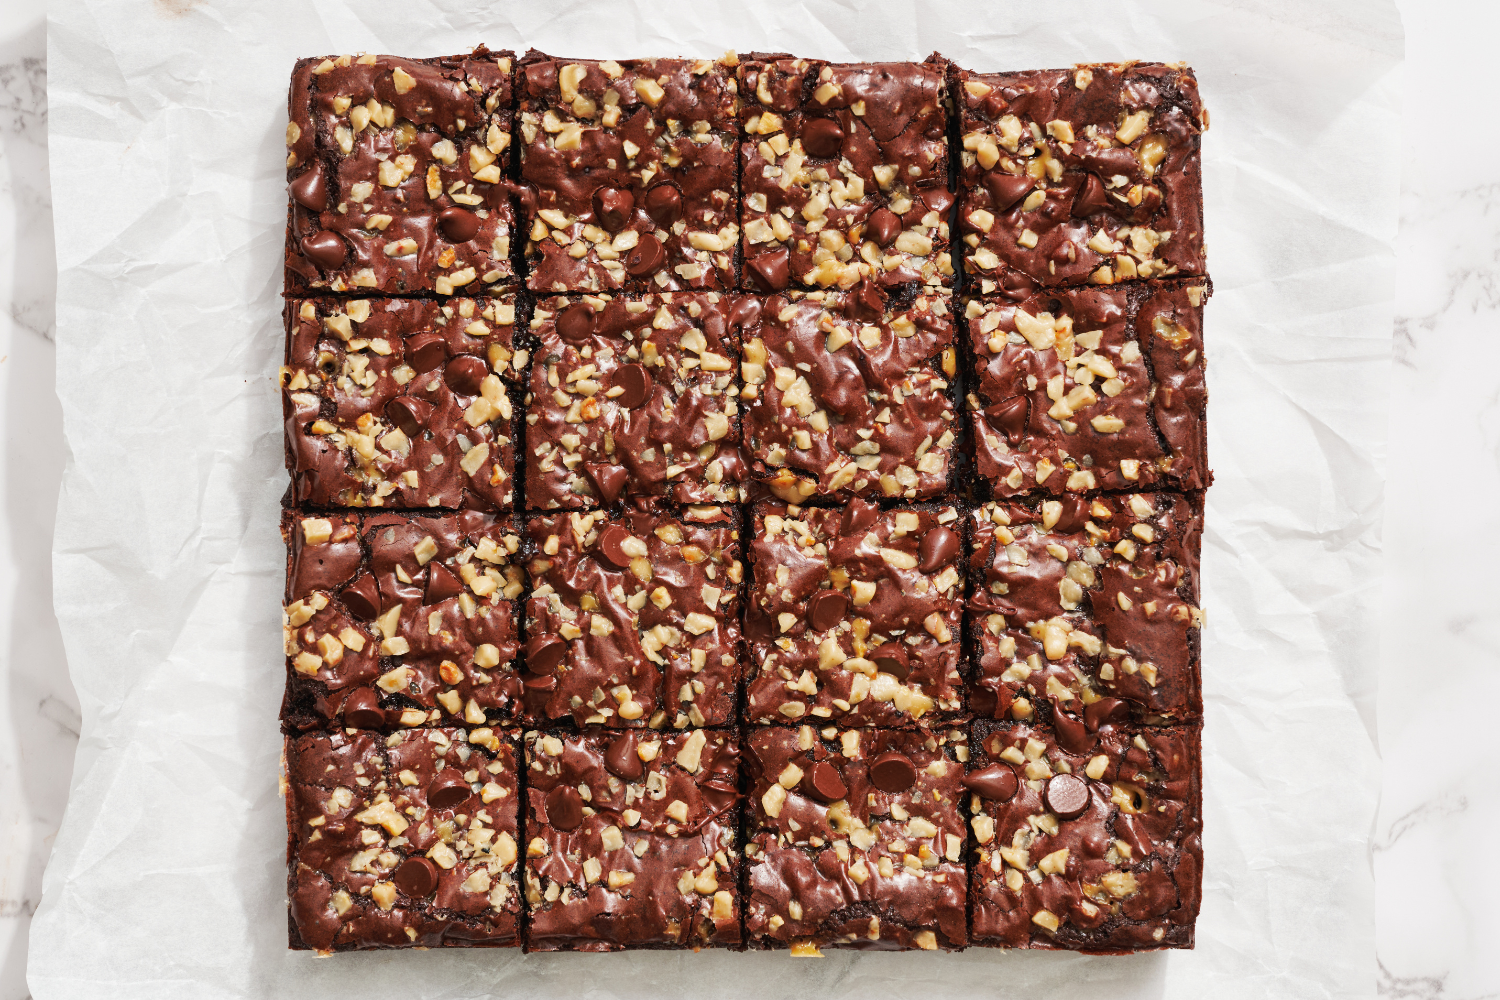 perfectly sliced toffee brownies, ready to serve.